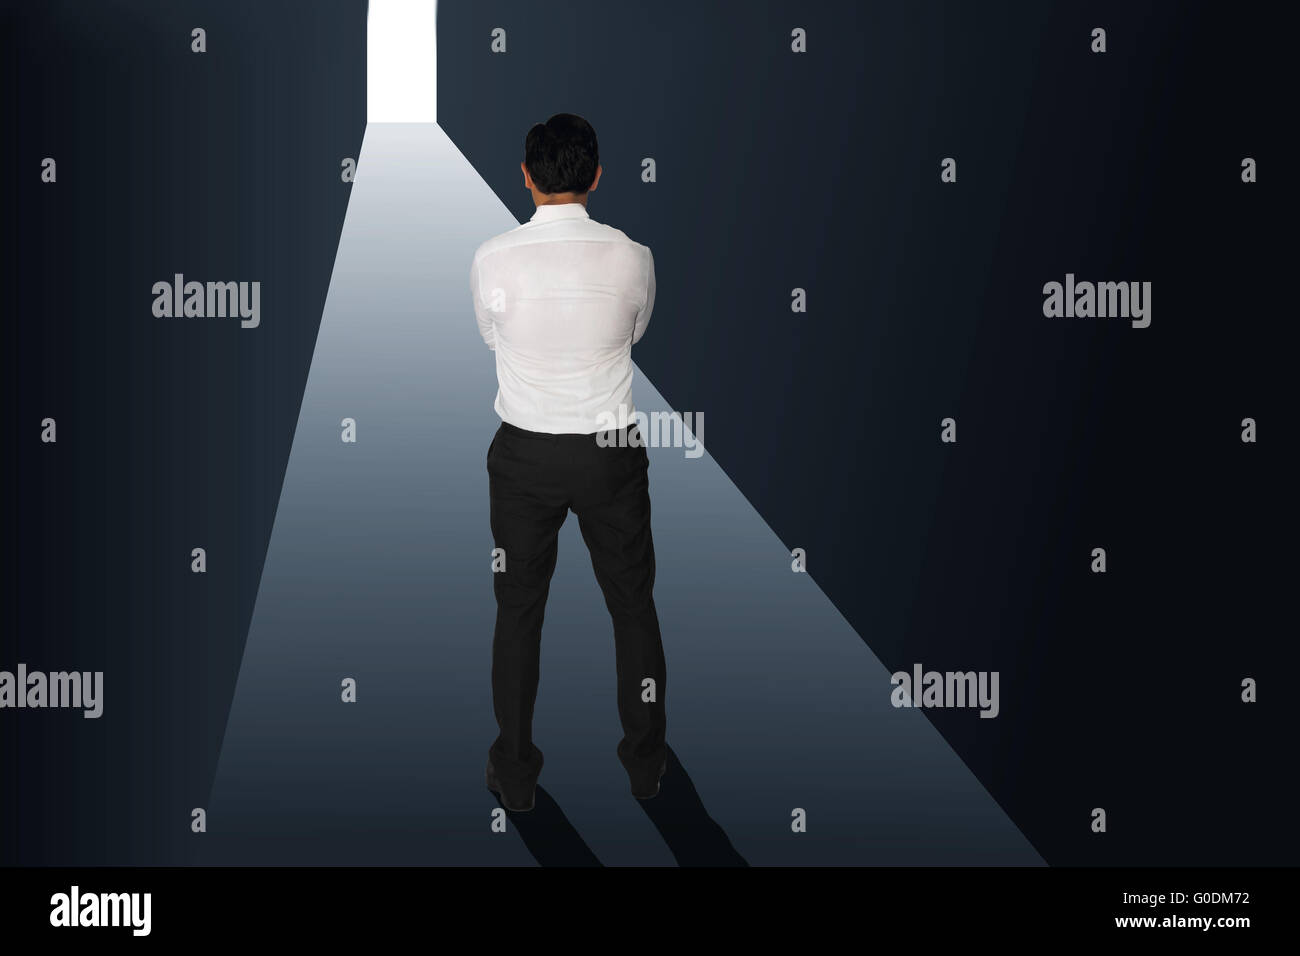 Challenge concept image rear view of a businessman starring at bright light at the end of dark tunnel Stock Photo